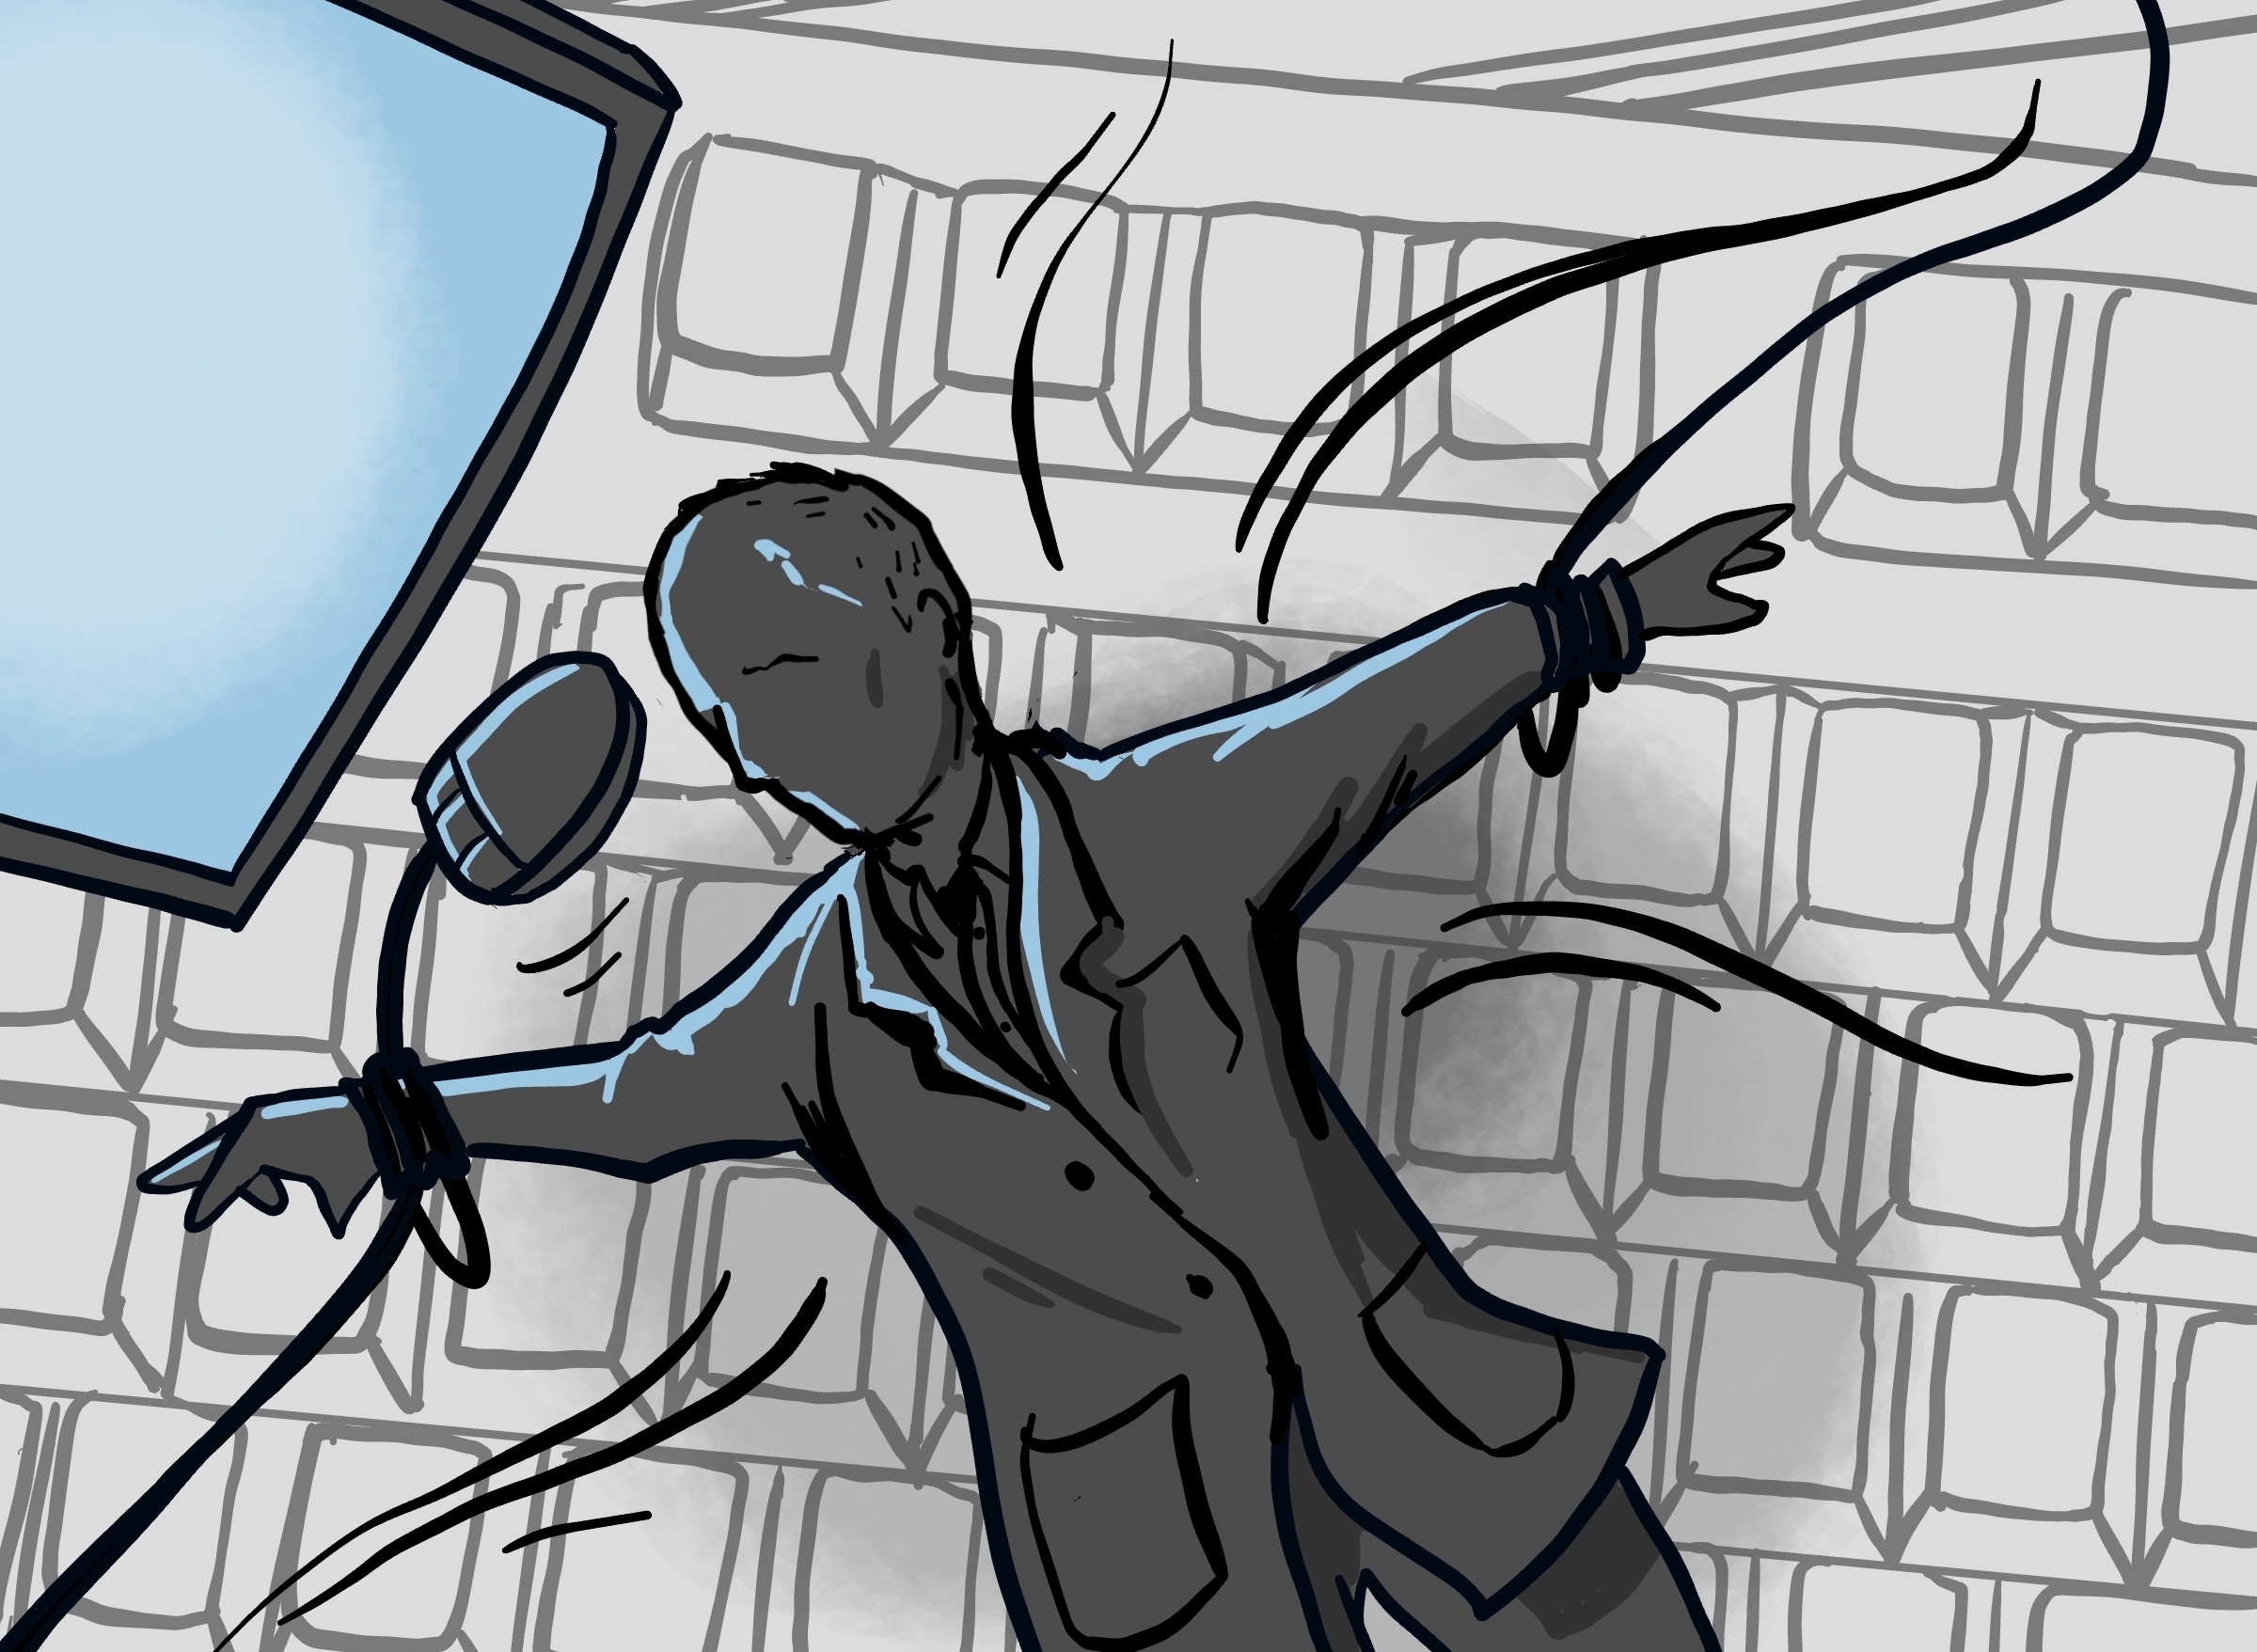 illustration of a doctor figure tangled in wires over a keyboard